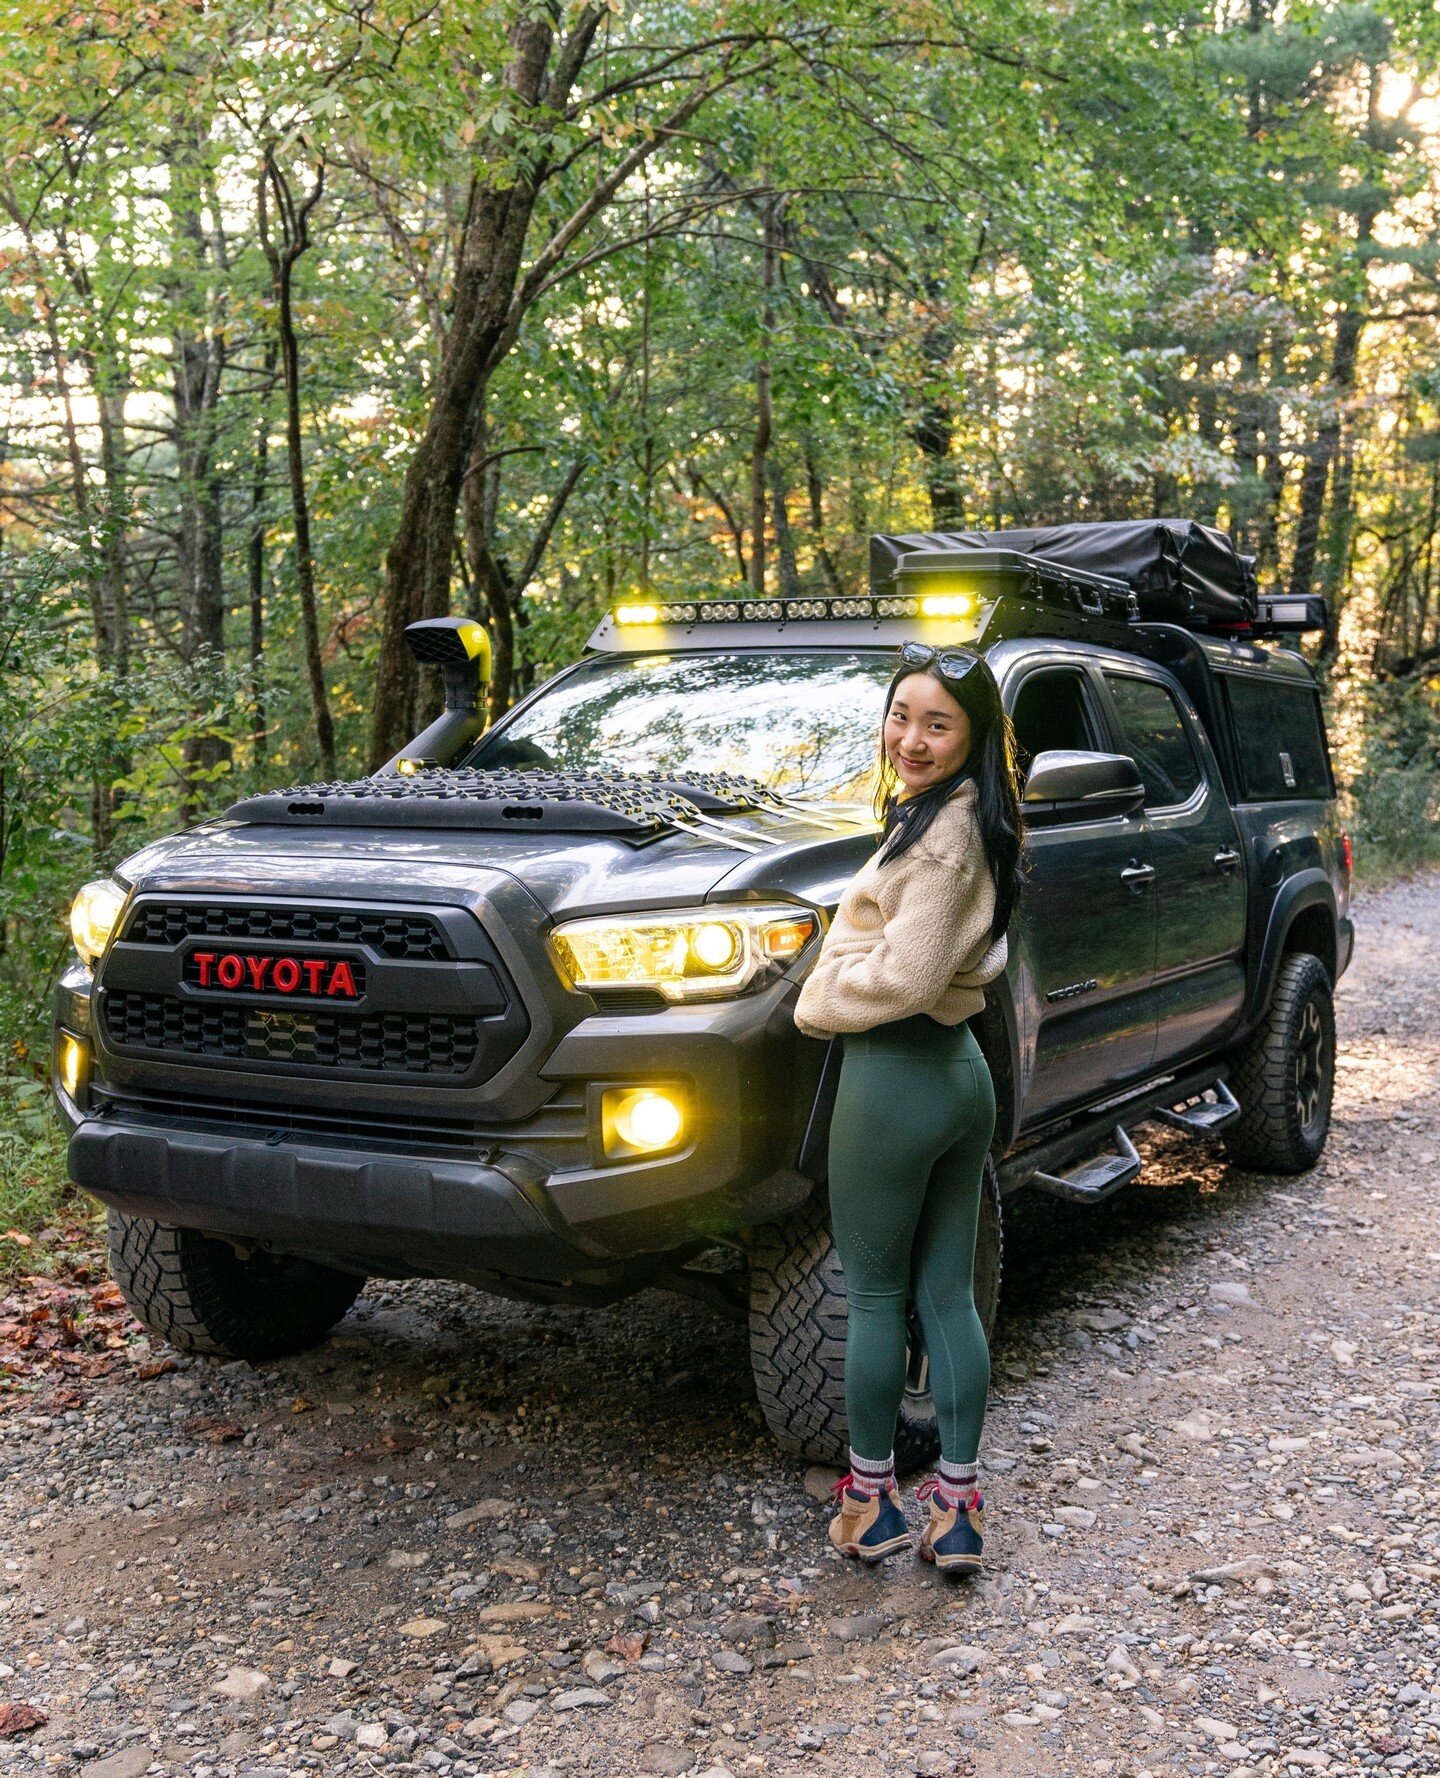 Here is a shot of Minji while we were headed up Tray Mountain to look for a camping spot! 🏕 
.
Subject @minjikim.archi
.⁠
Image by @sethfjohnson
.⁠
&copy; Rabbit TraX⁠
.⁠
.⁠
.⁠
.⁠
.⁠
#rabbittrax #overland #overlanding #overlander #overlanders #overl